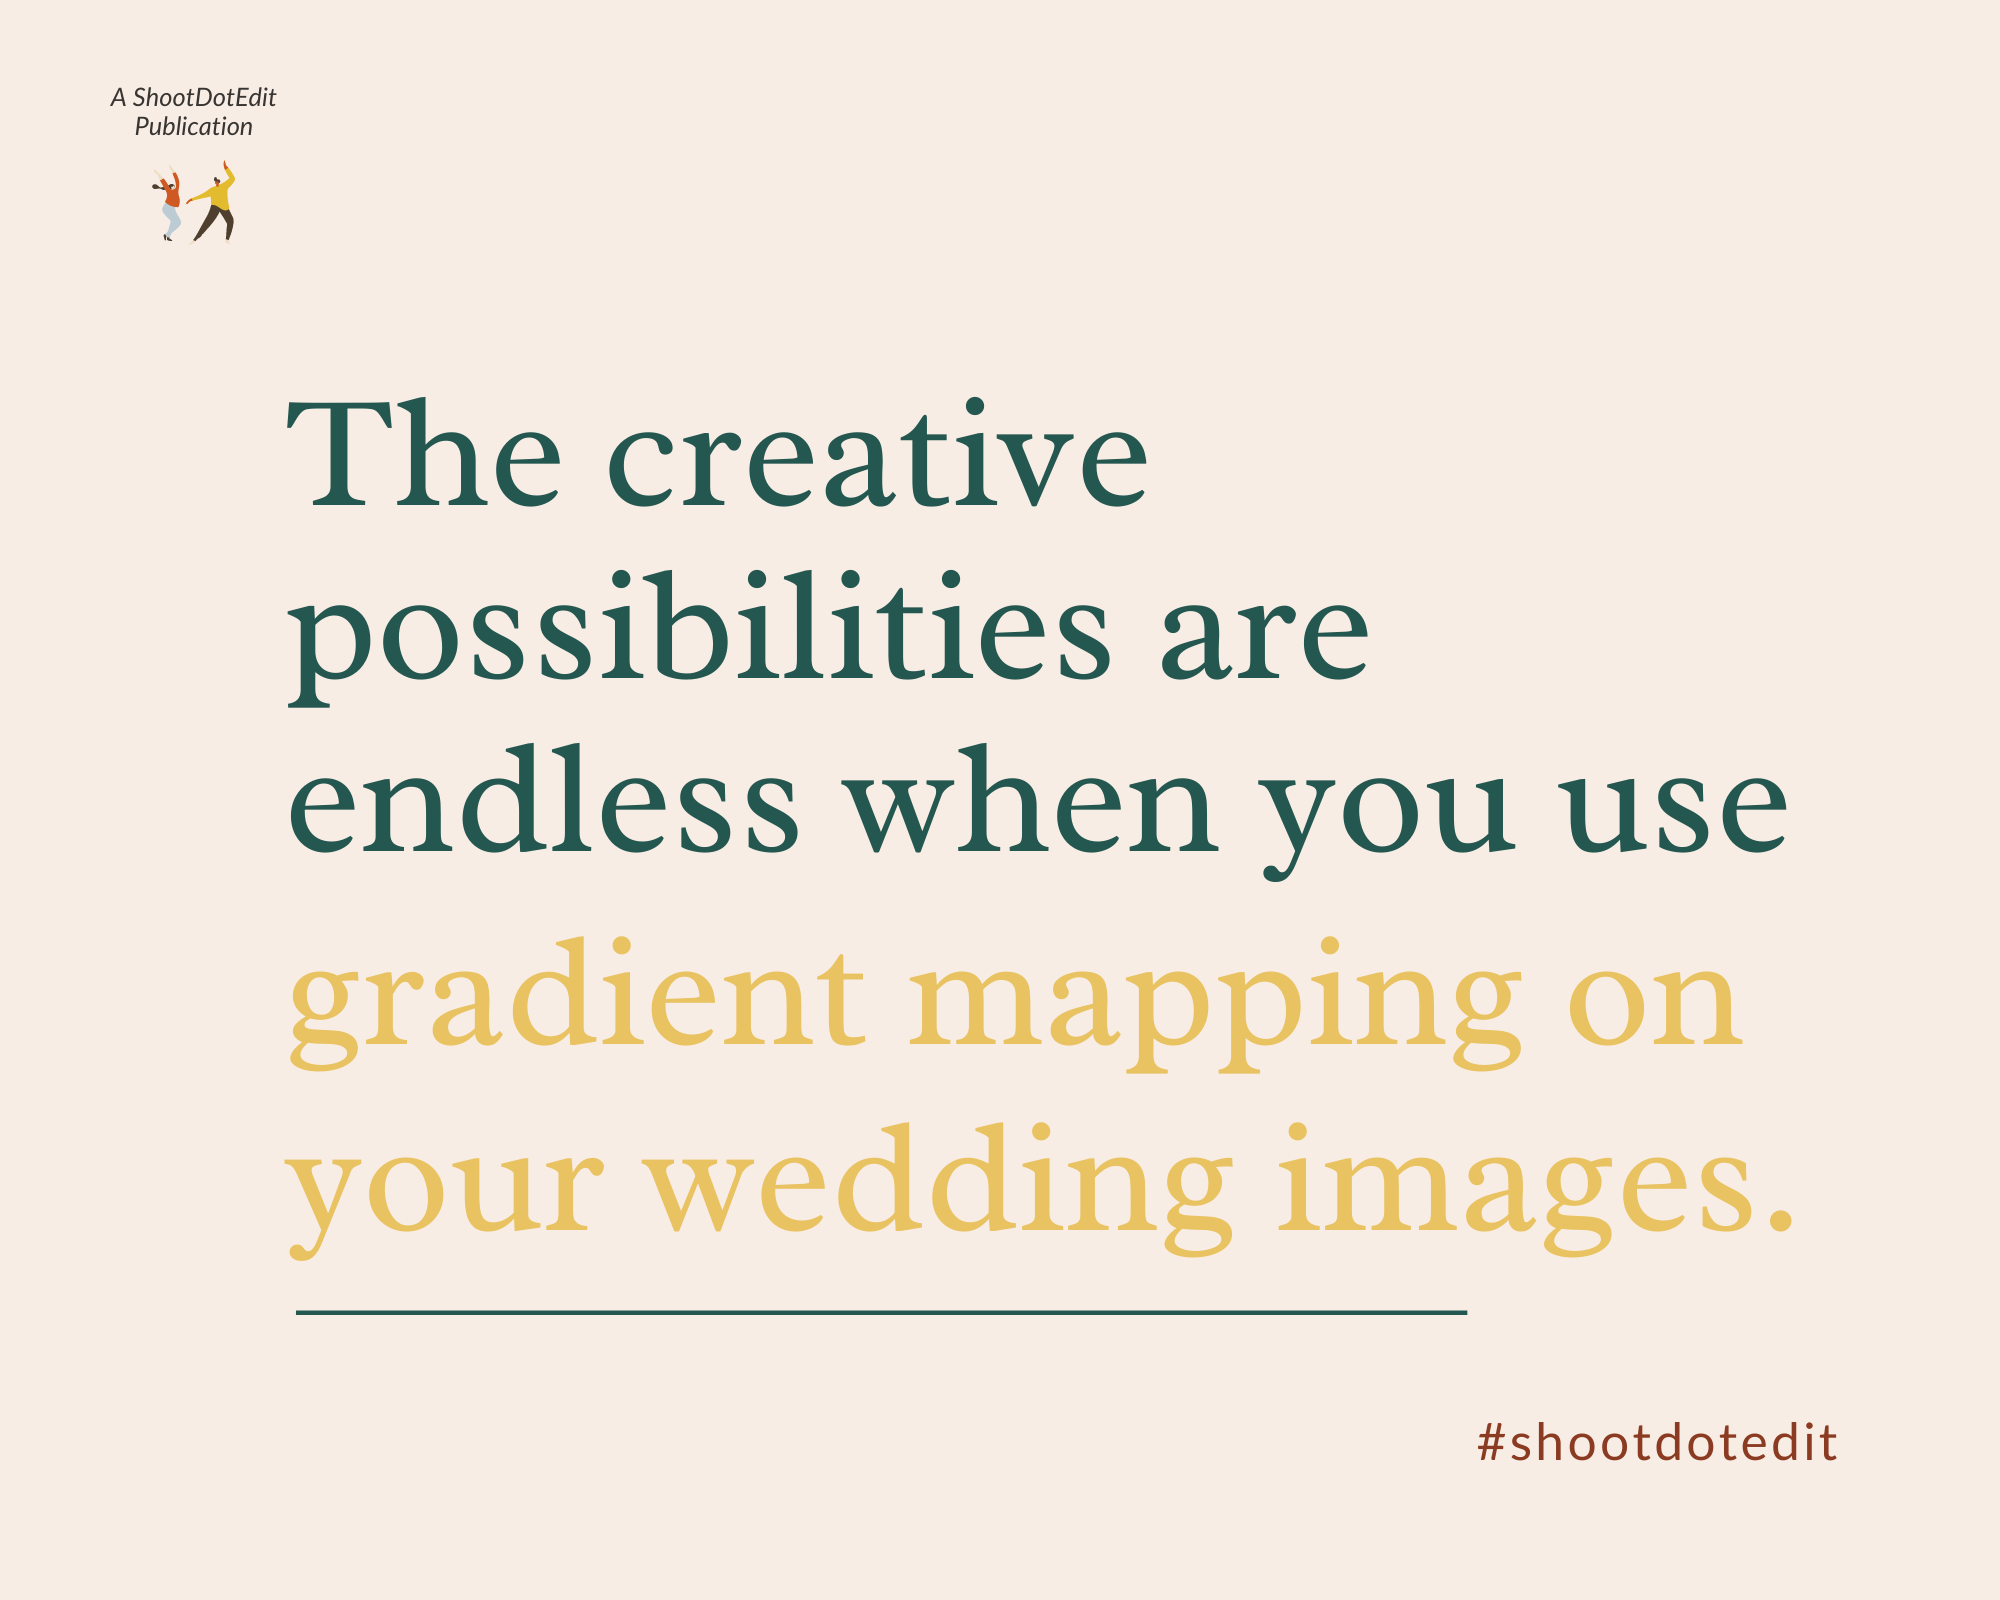 Infographic stating the creative possibilities are endless when you use gradient mapping on your wedding images